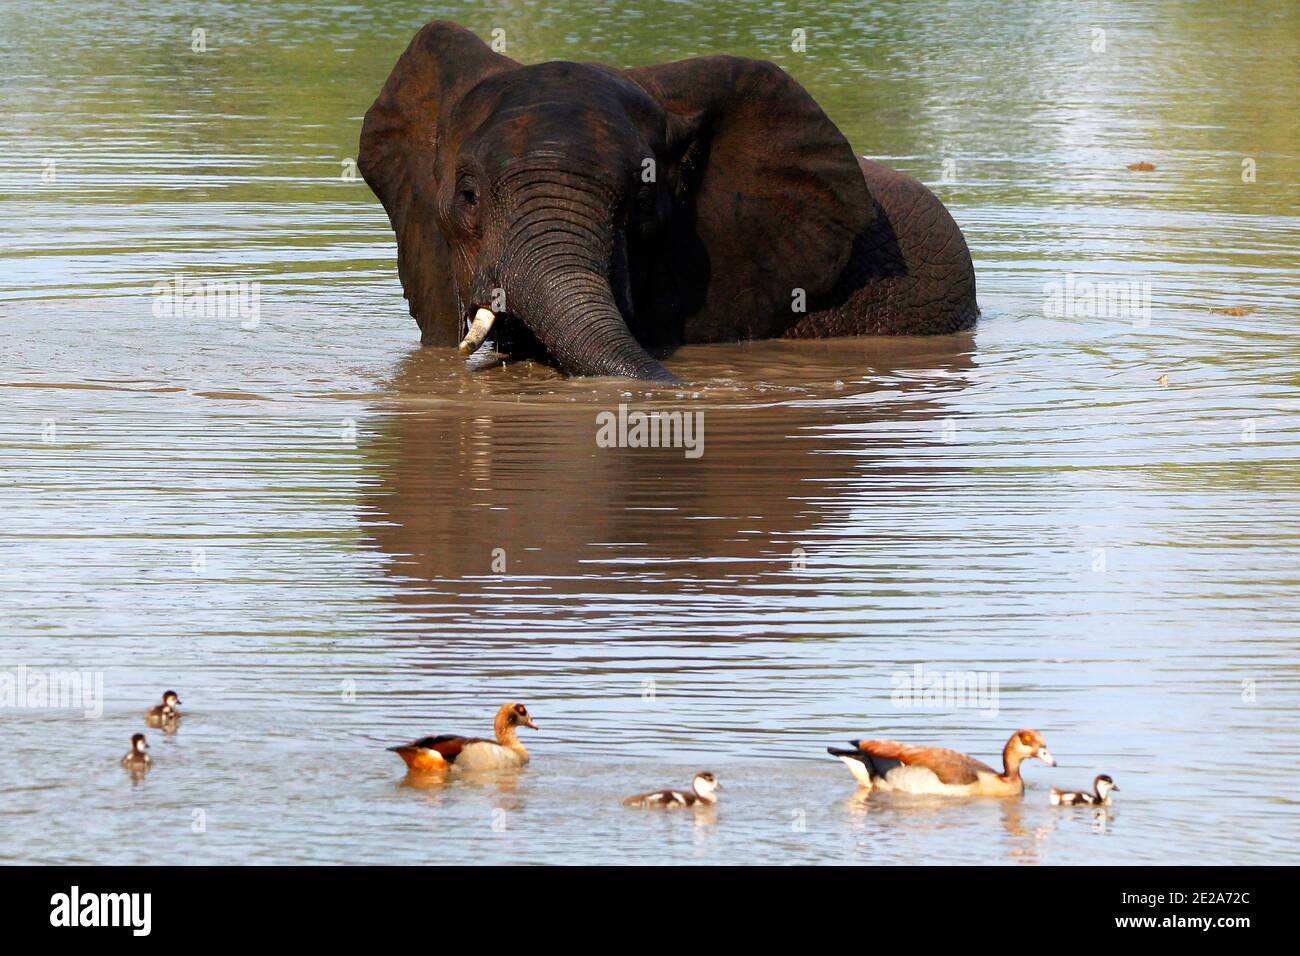 A young bull elephant enjoying a dip in a lake and confronting a family of egyptian geese. Stock Photo